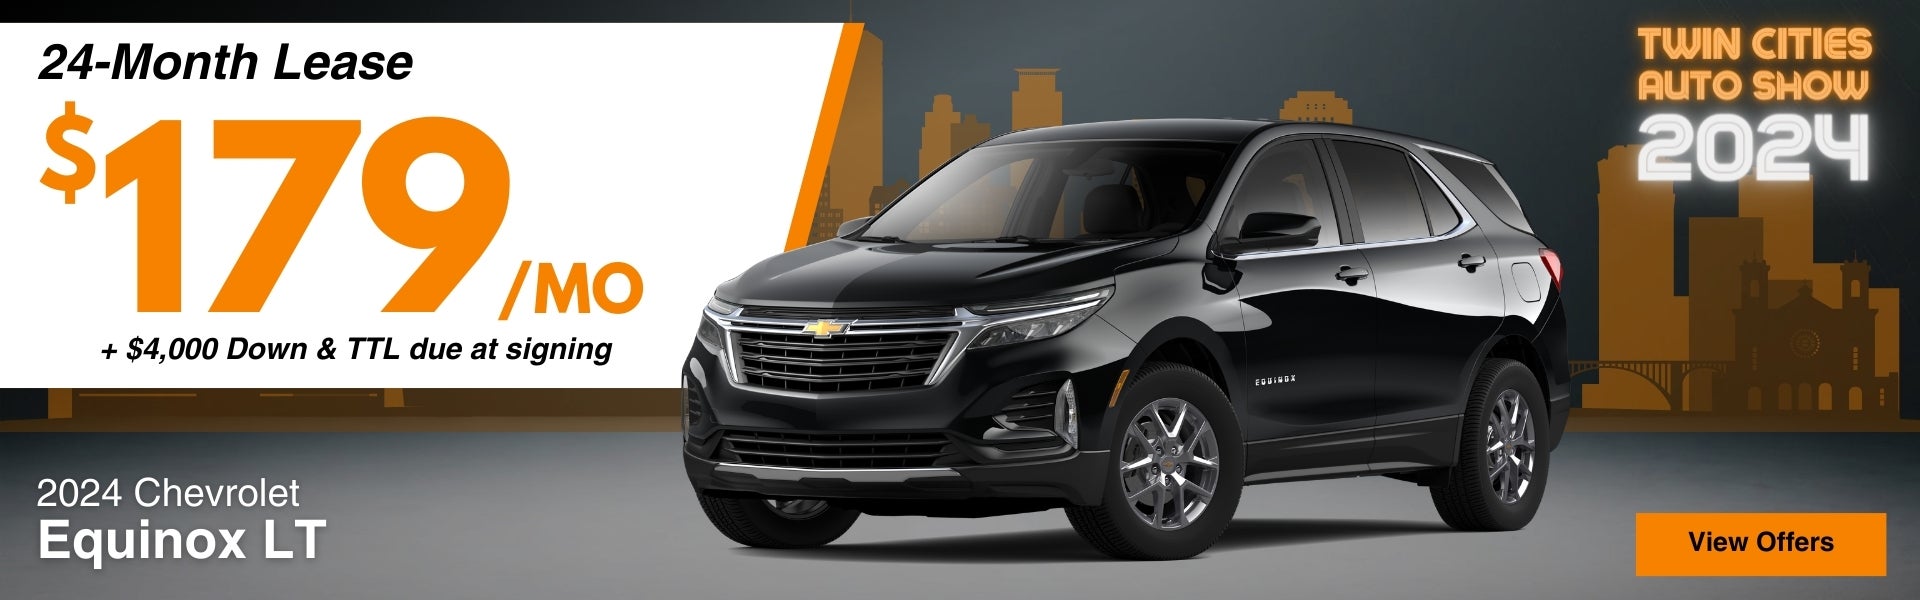 Chevrolet Equinox Lease Offer